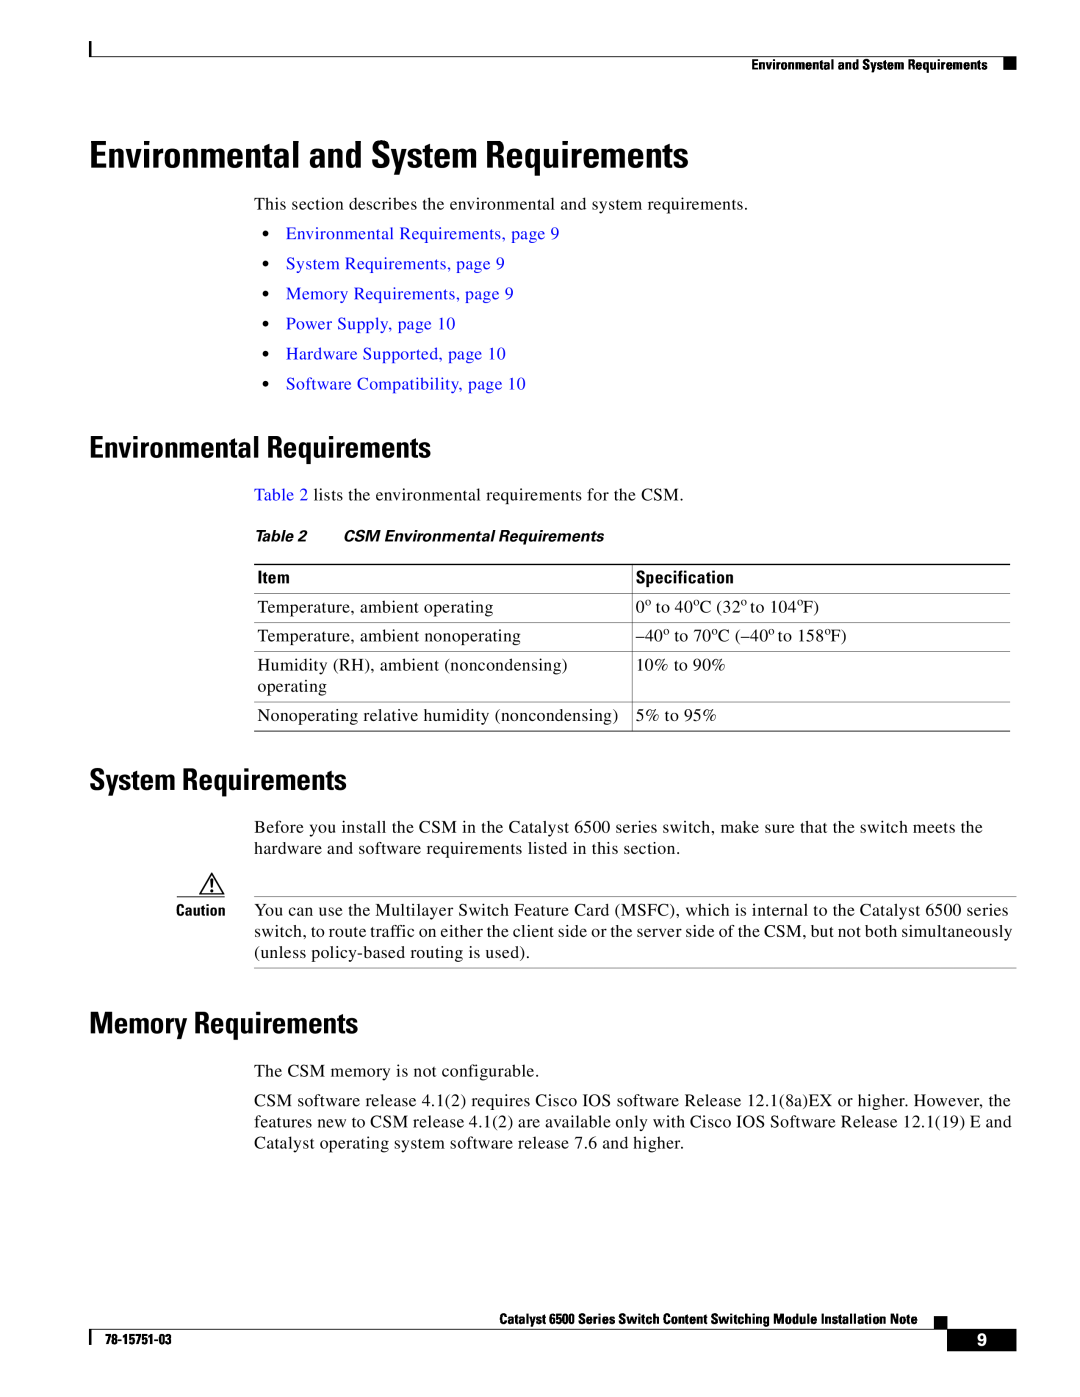 Cisco Systems WS-X6066-SLB-APC Environmental and System Requirements, Environmental Requirements, Memory Requirements 